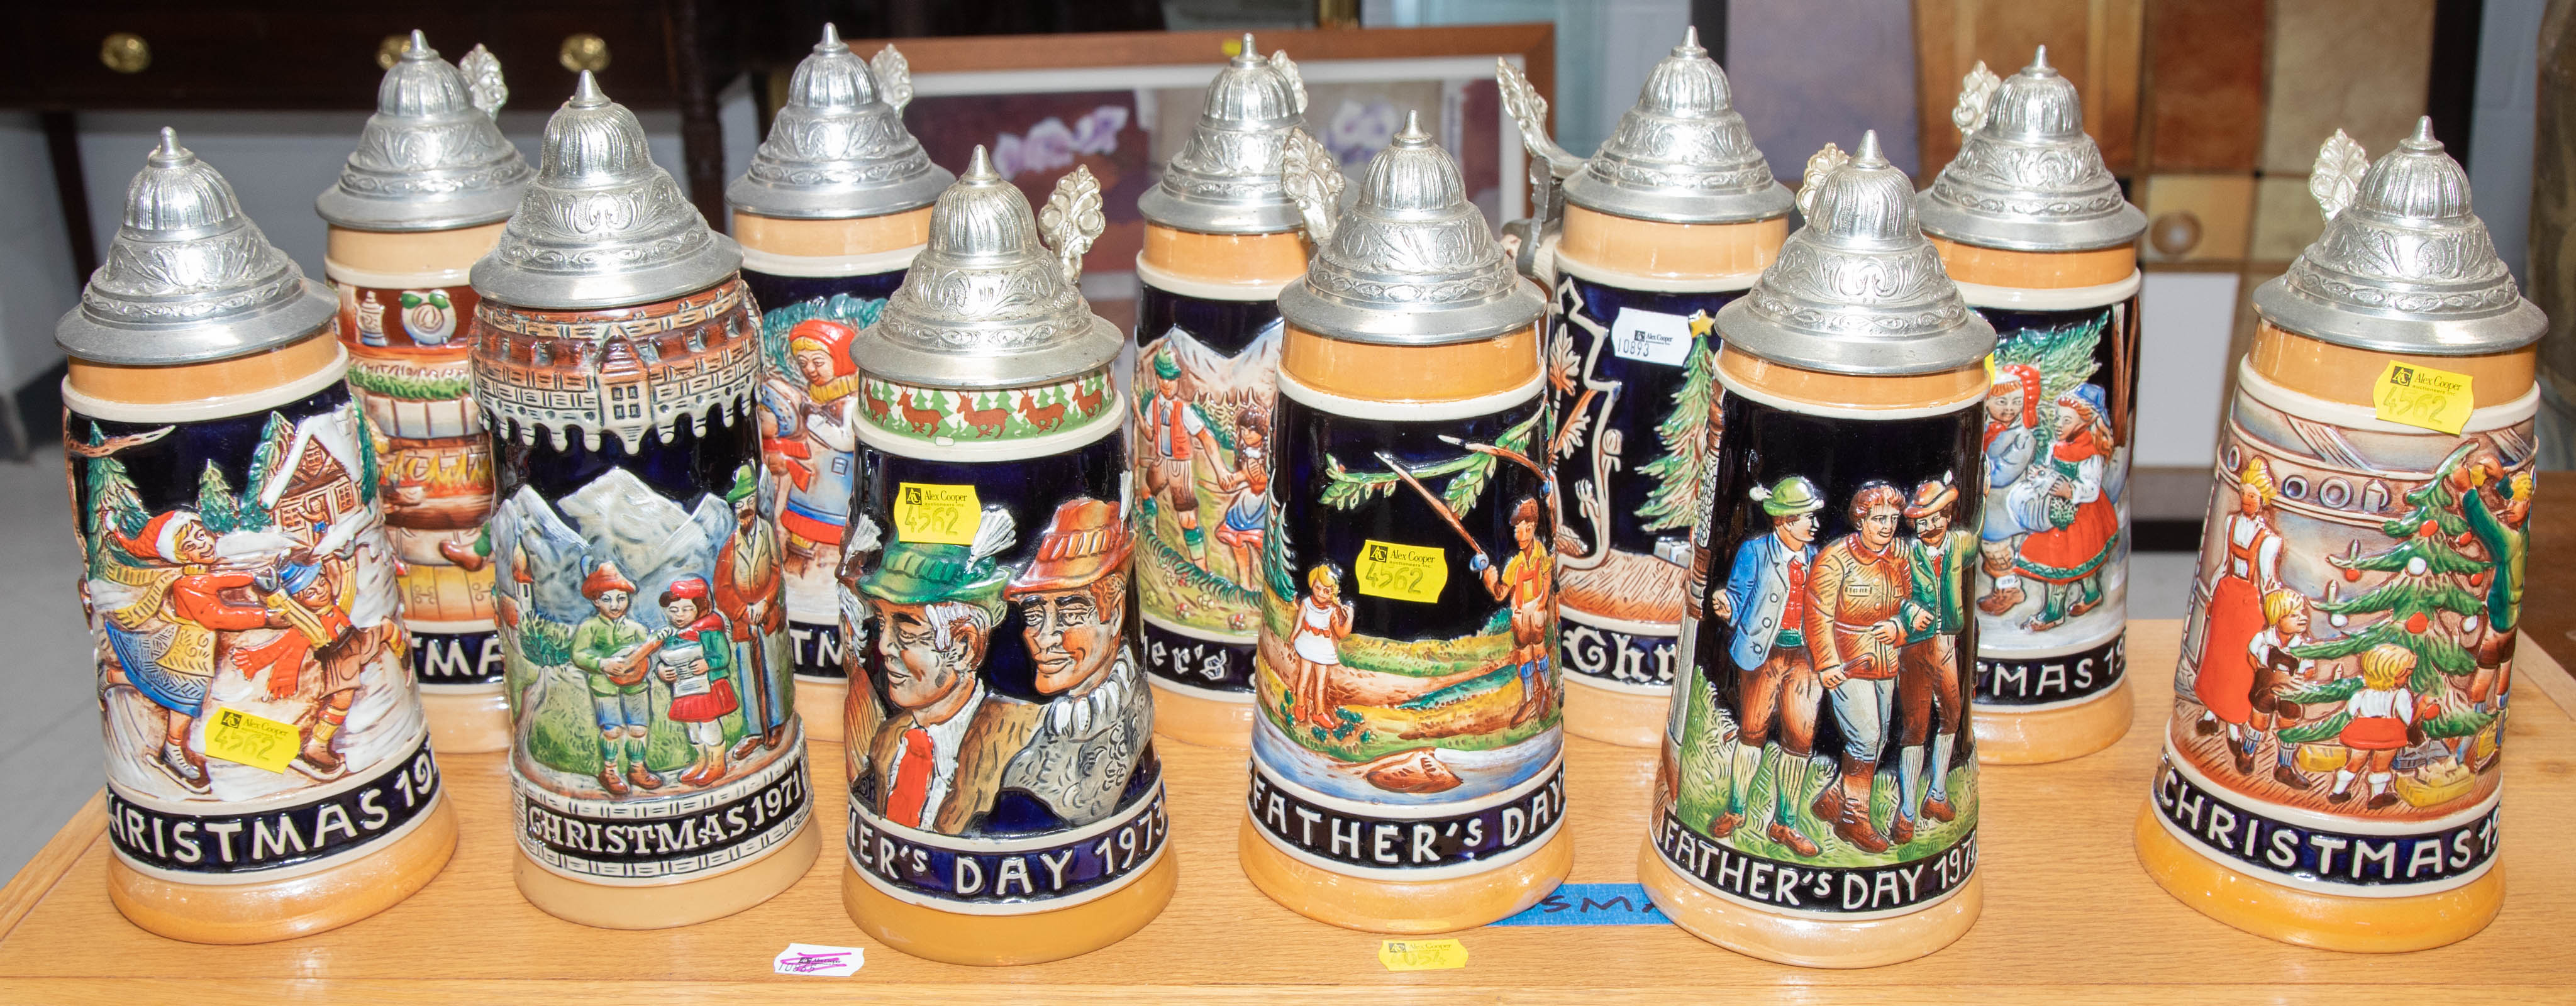 11 SCHMID FATHERS DAY & CHRISTMAS STEINS